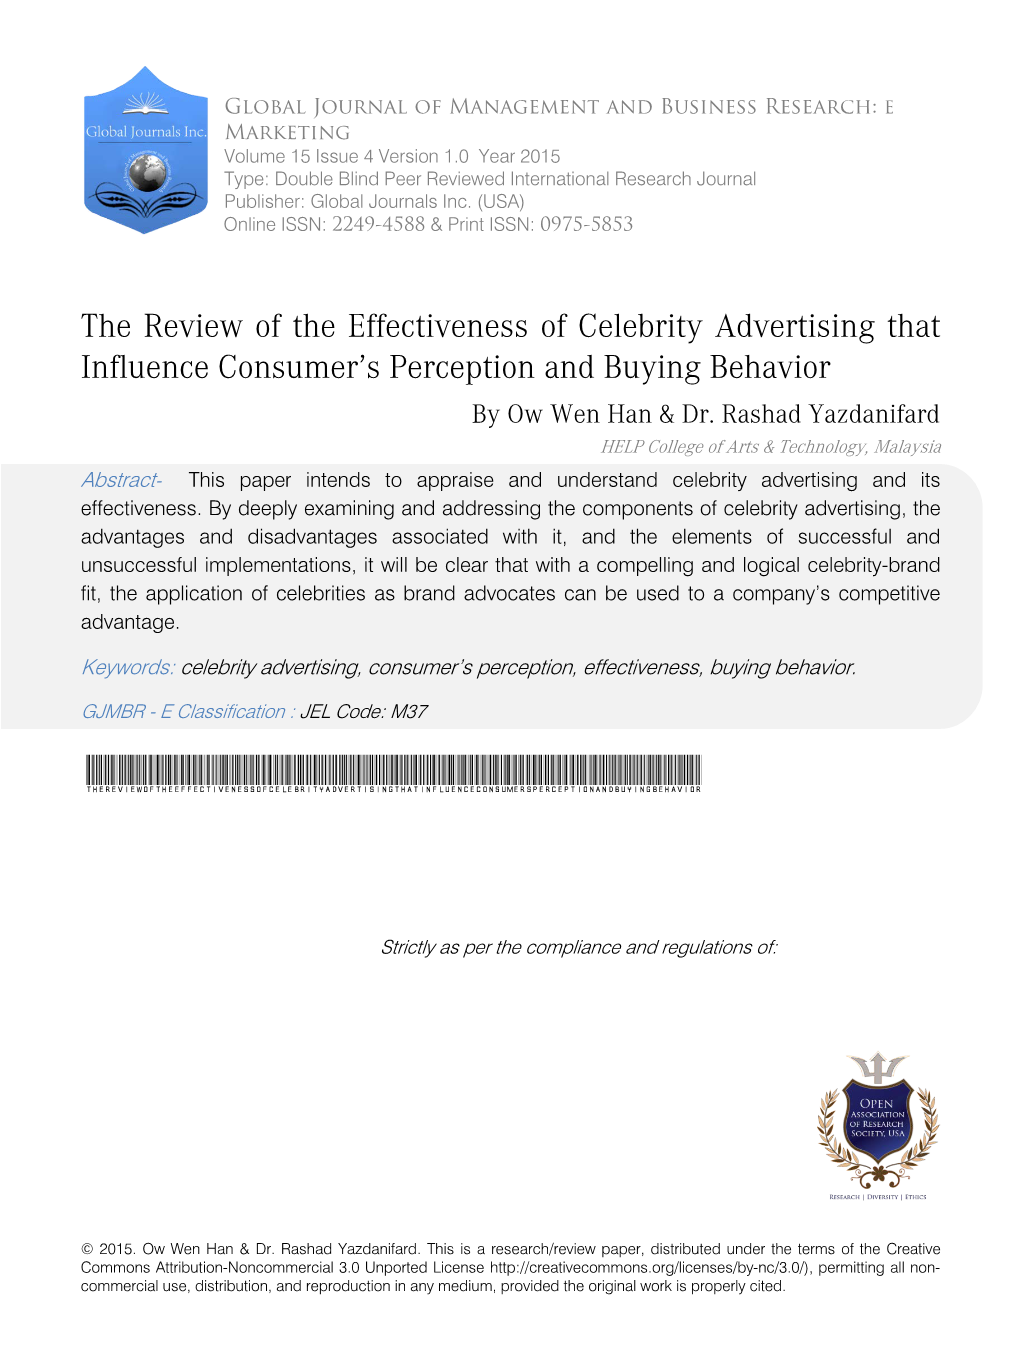 The Review of the Effectiveness of Celebrity Advertising That Influence Consumer’S Perception and Buying Behavior by Ow Wen Han & Dr